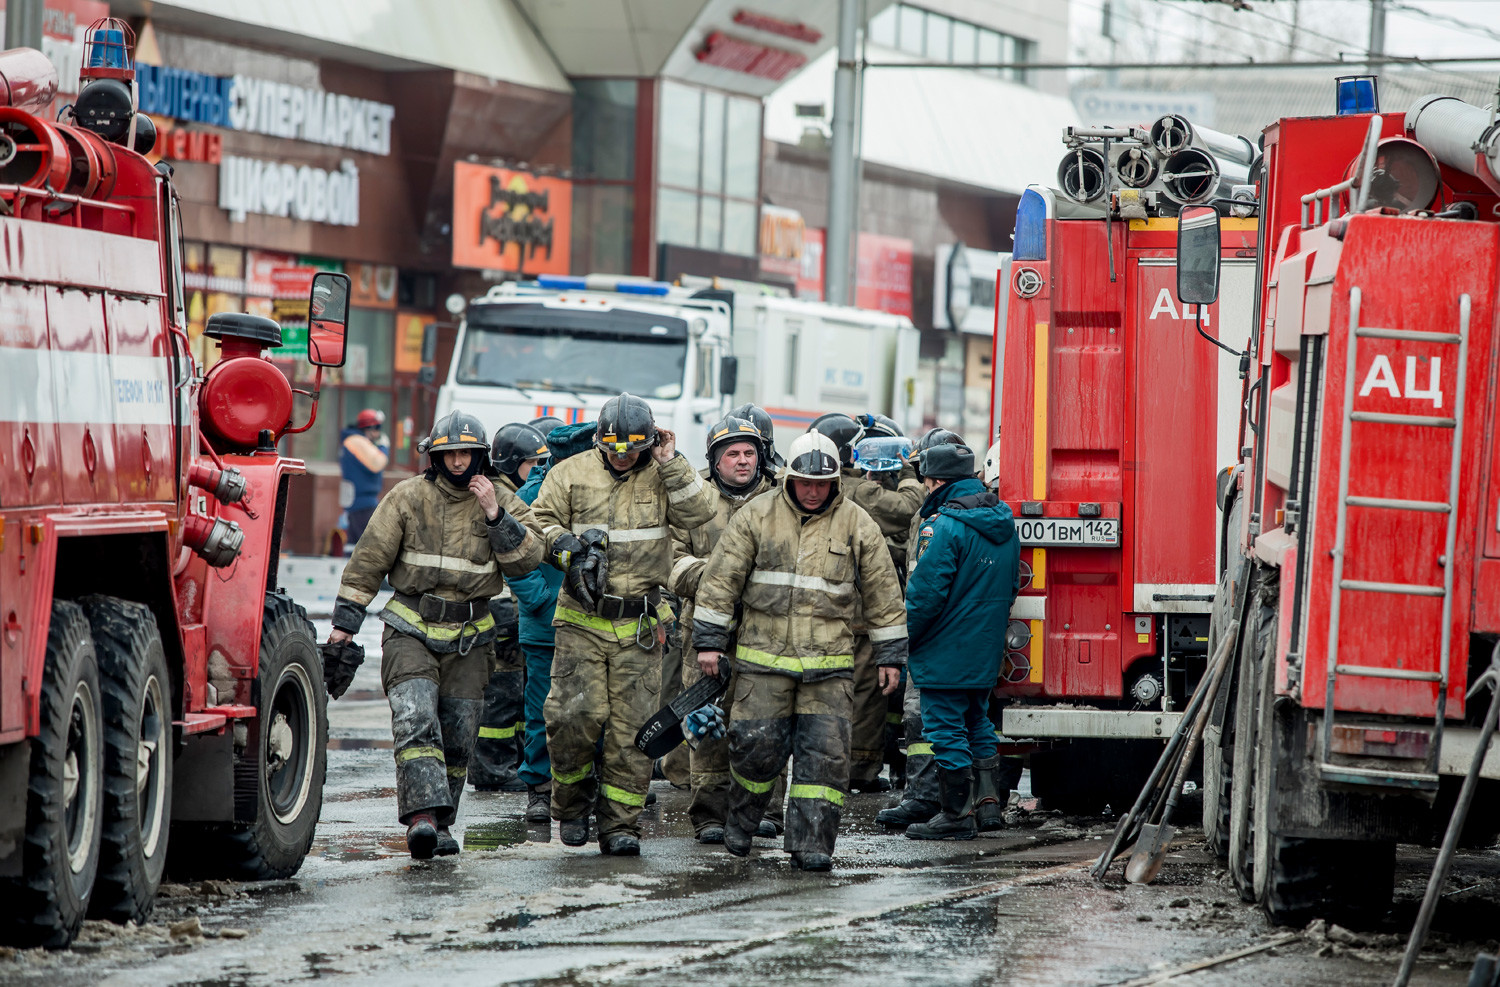 A group of firefighters walk near the scene of the shopping center after a fire on March 26, 2018.